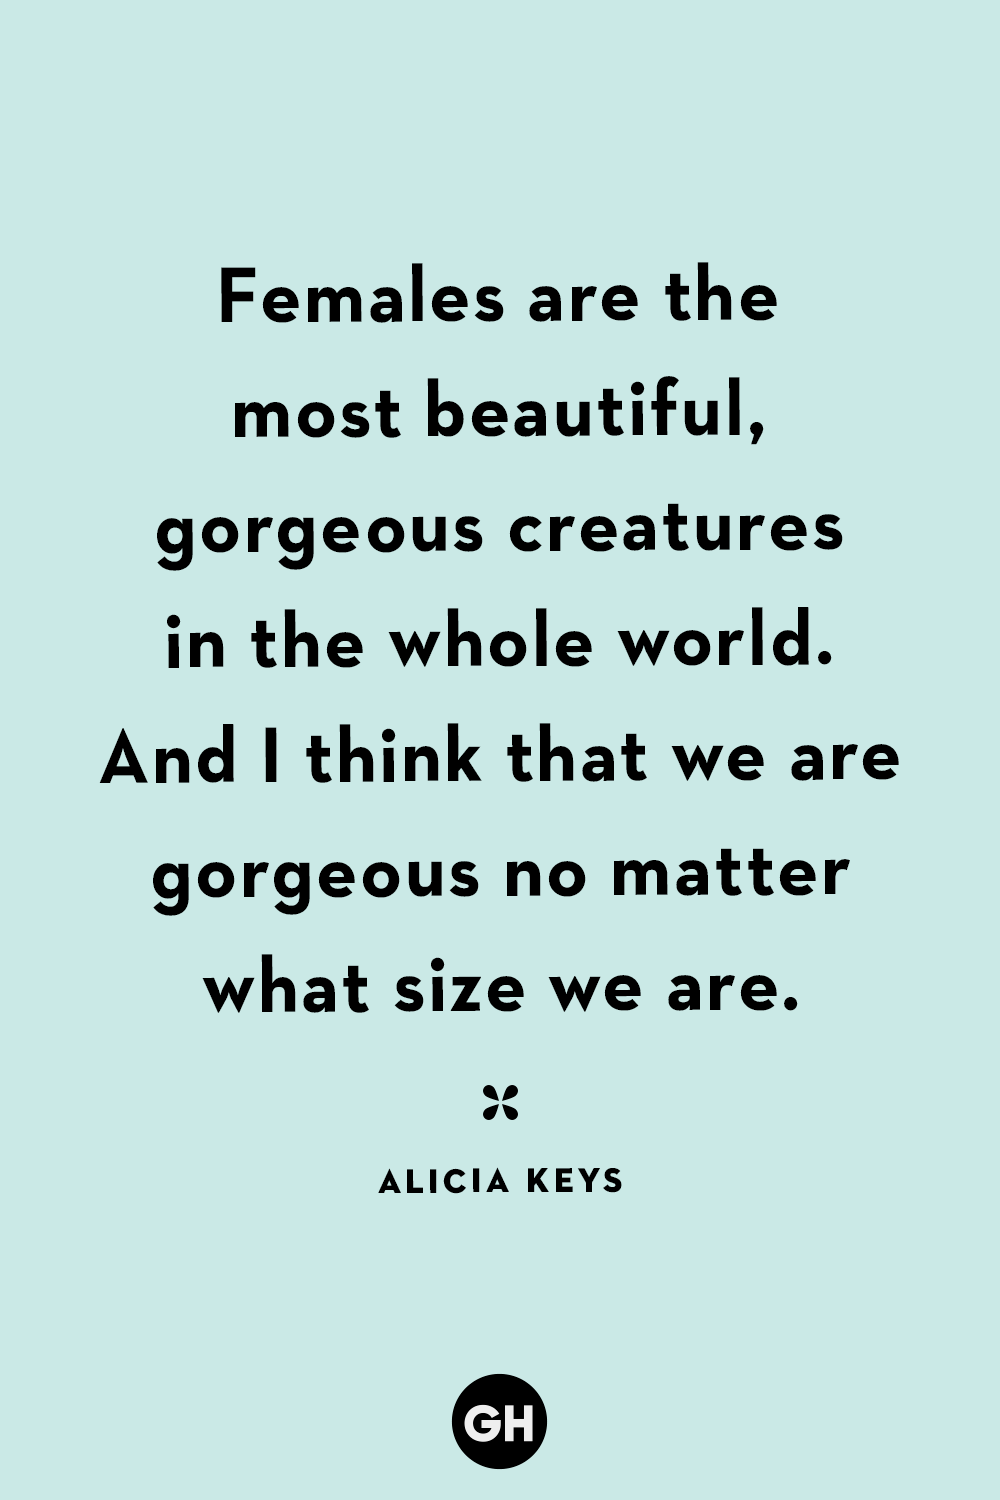 beauty quotes and sayings for women